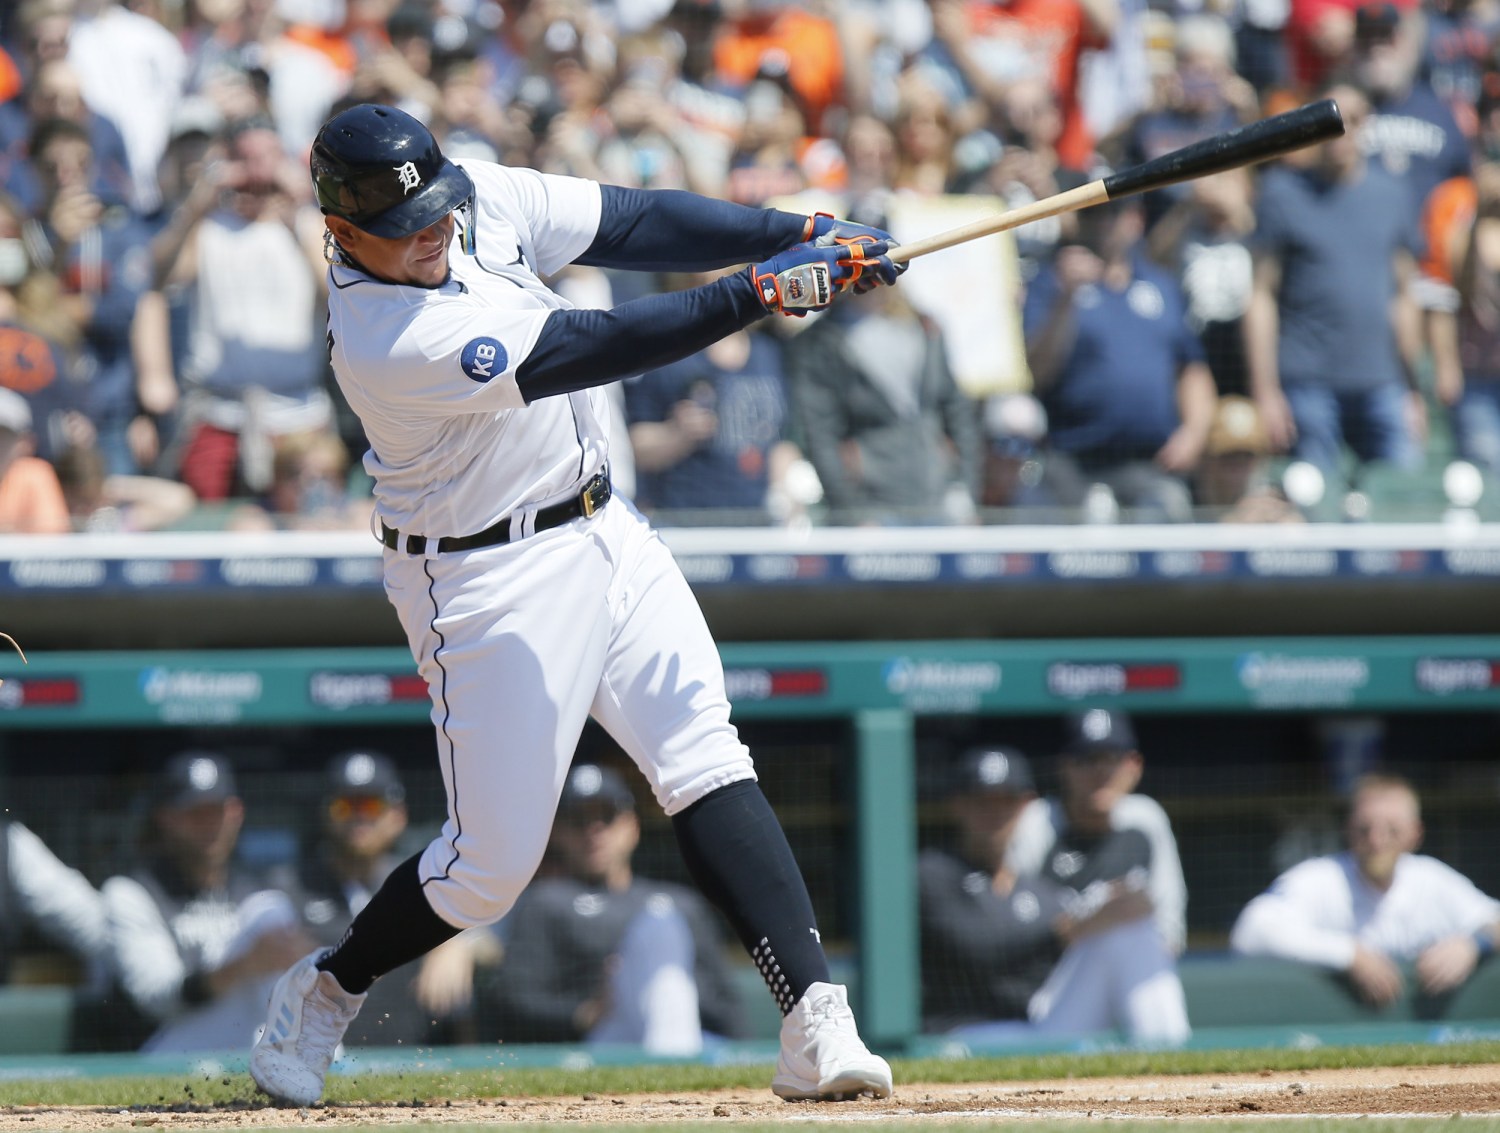 CHART: Miguel Cabrera's Career Looks Incredibly Similar to Hank Aaron